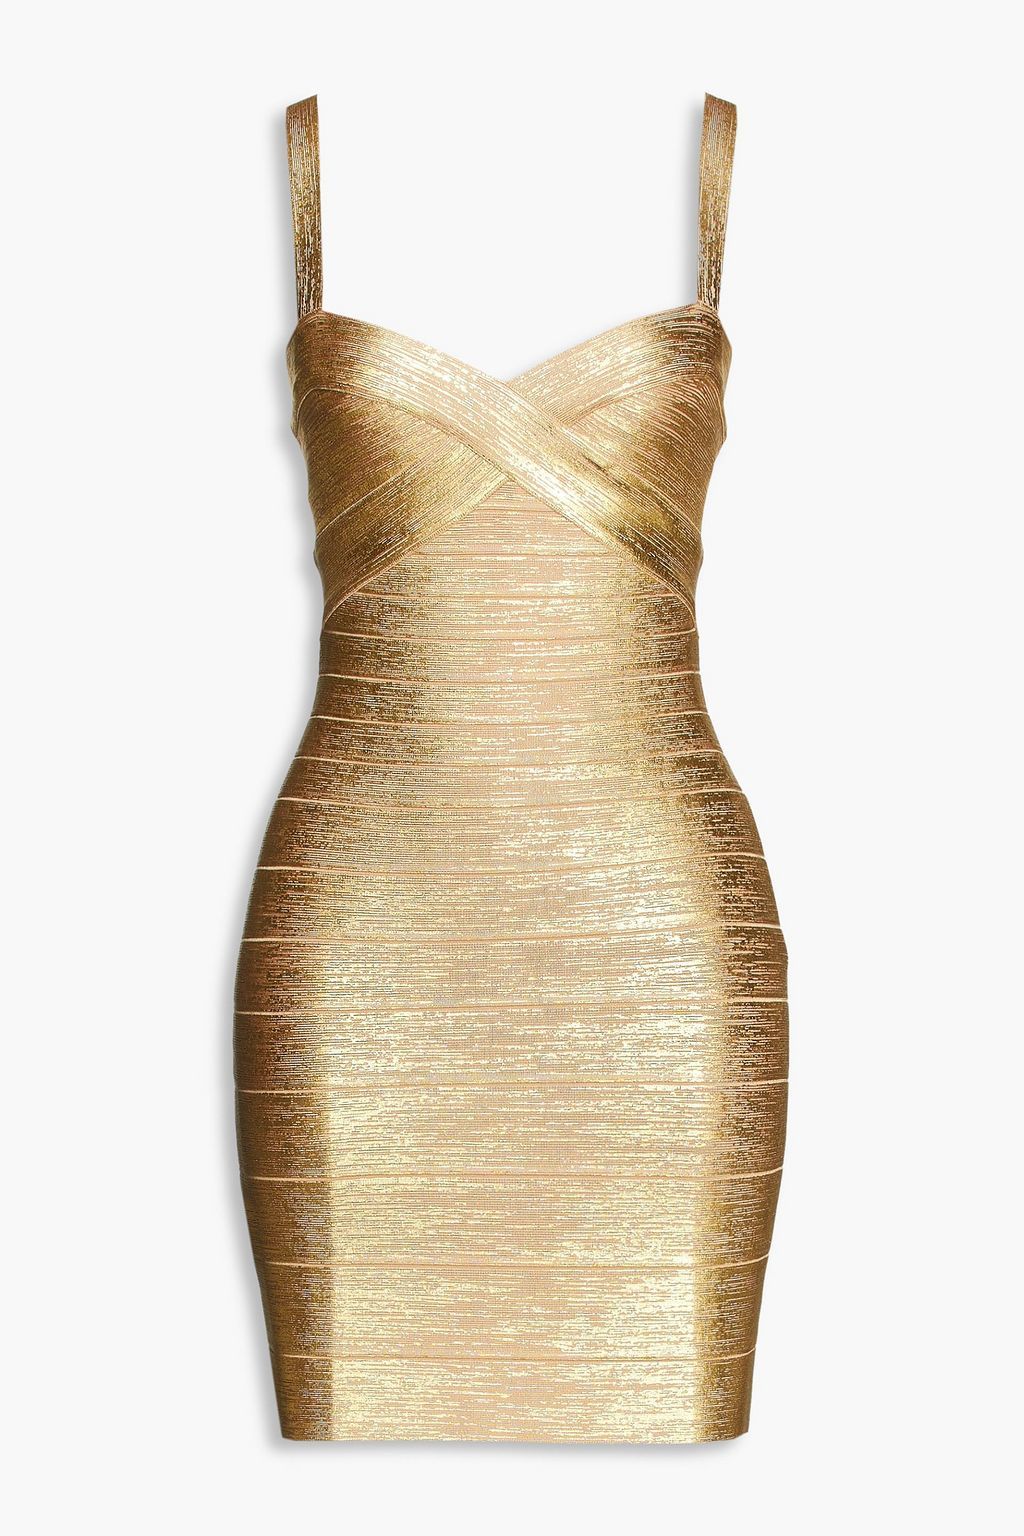 Bandage dresses a great look provider